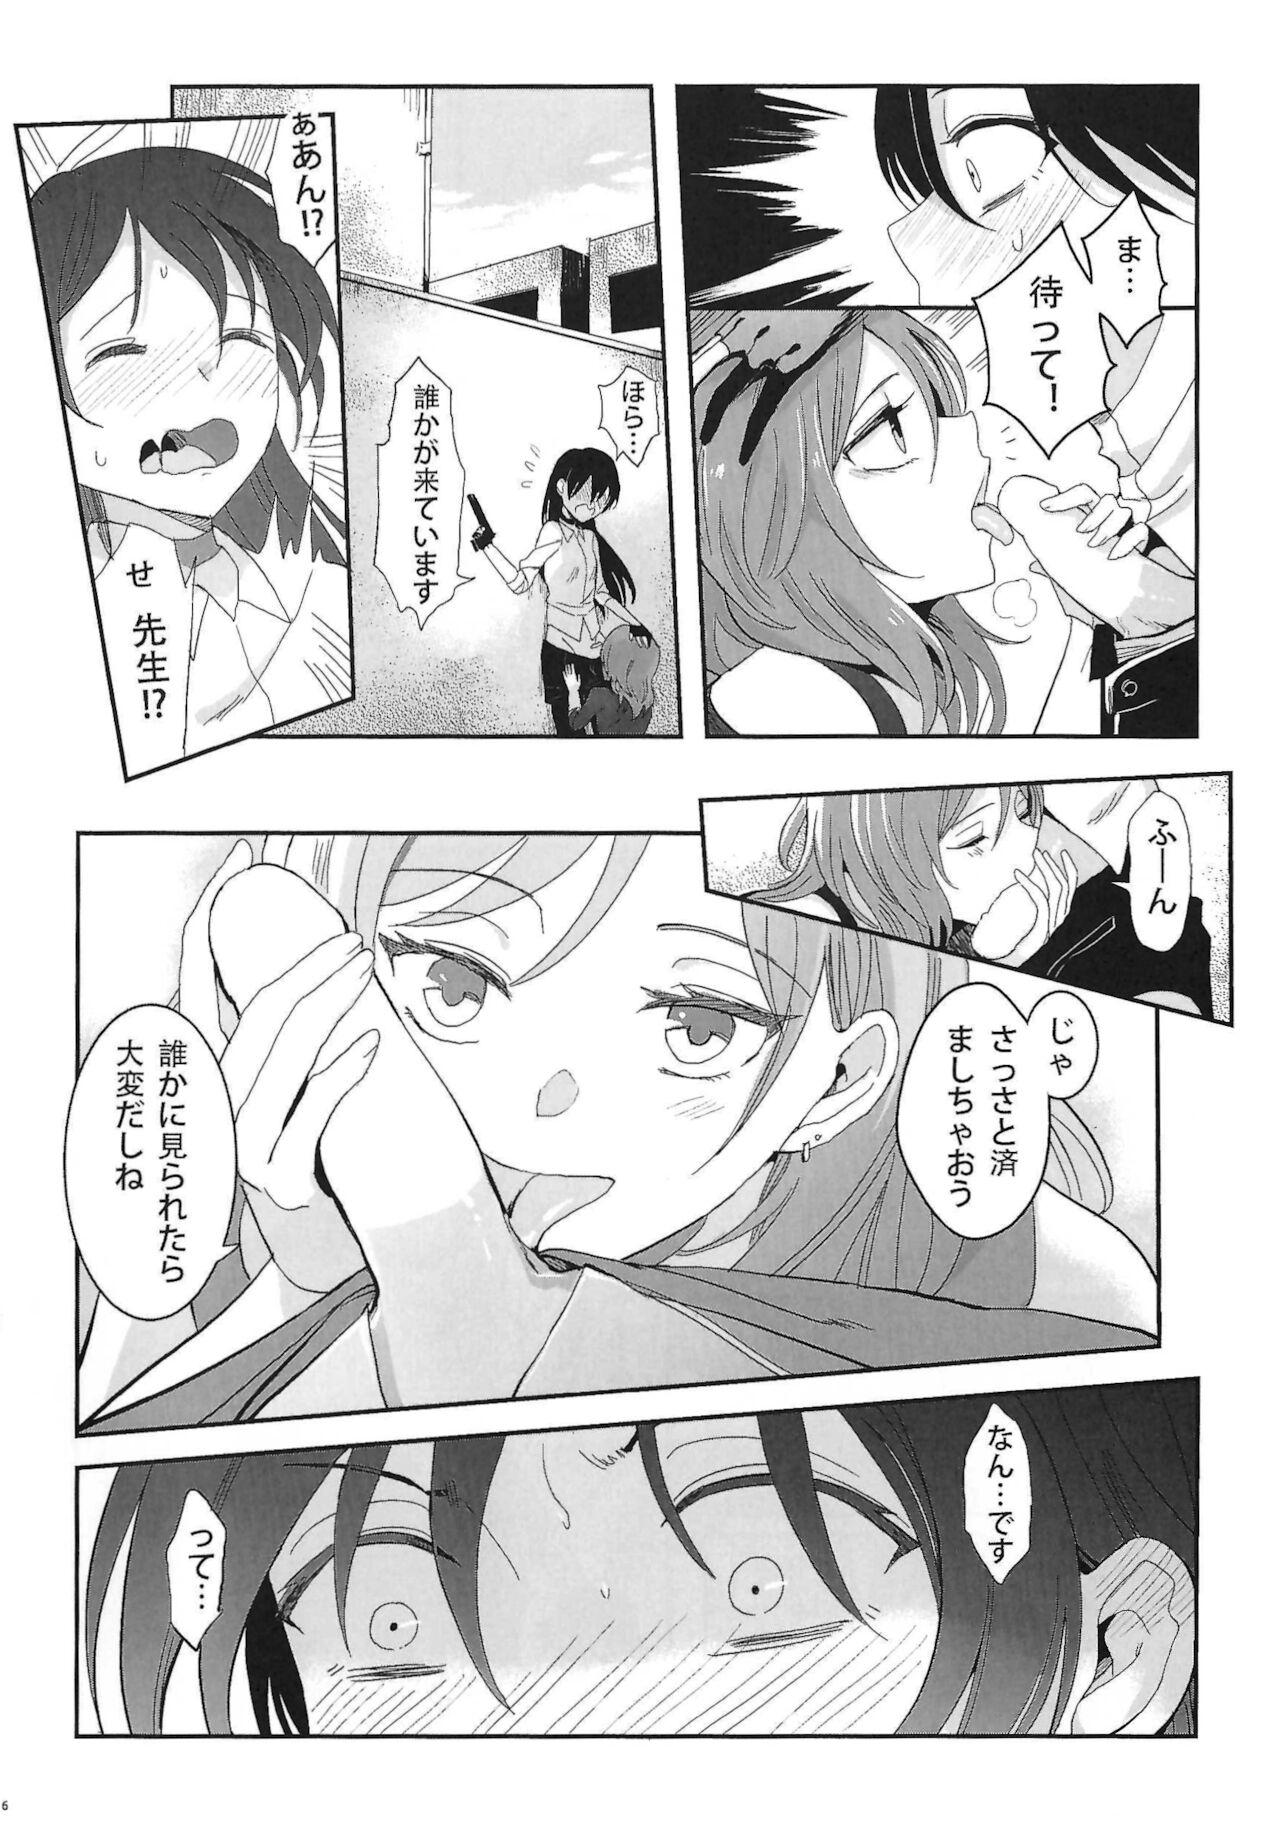 Gaysex 斜辺線 - Love live Culote - Page 7